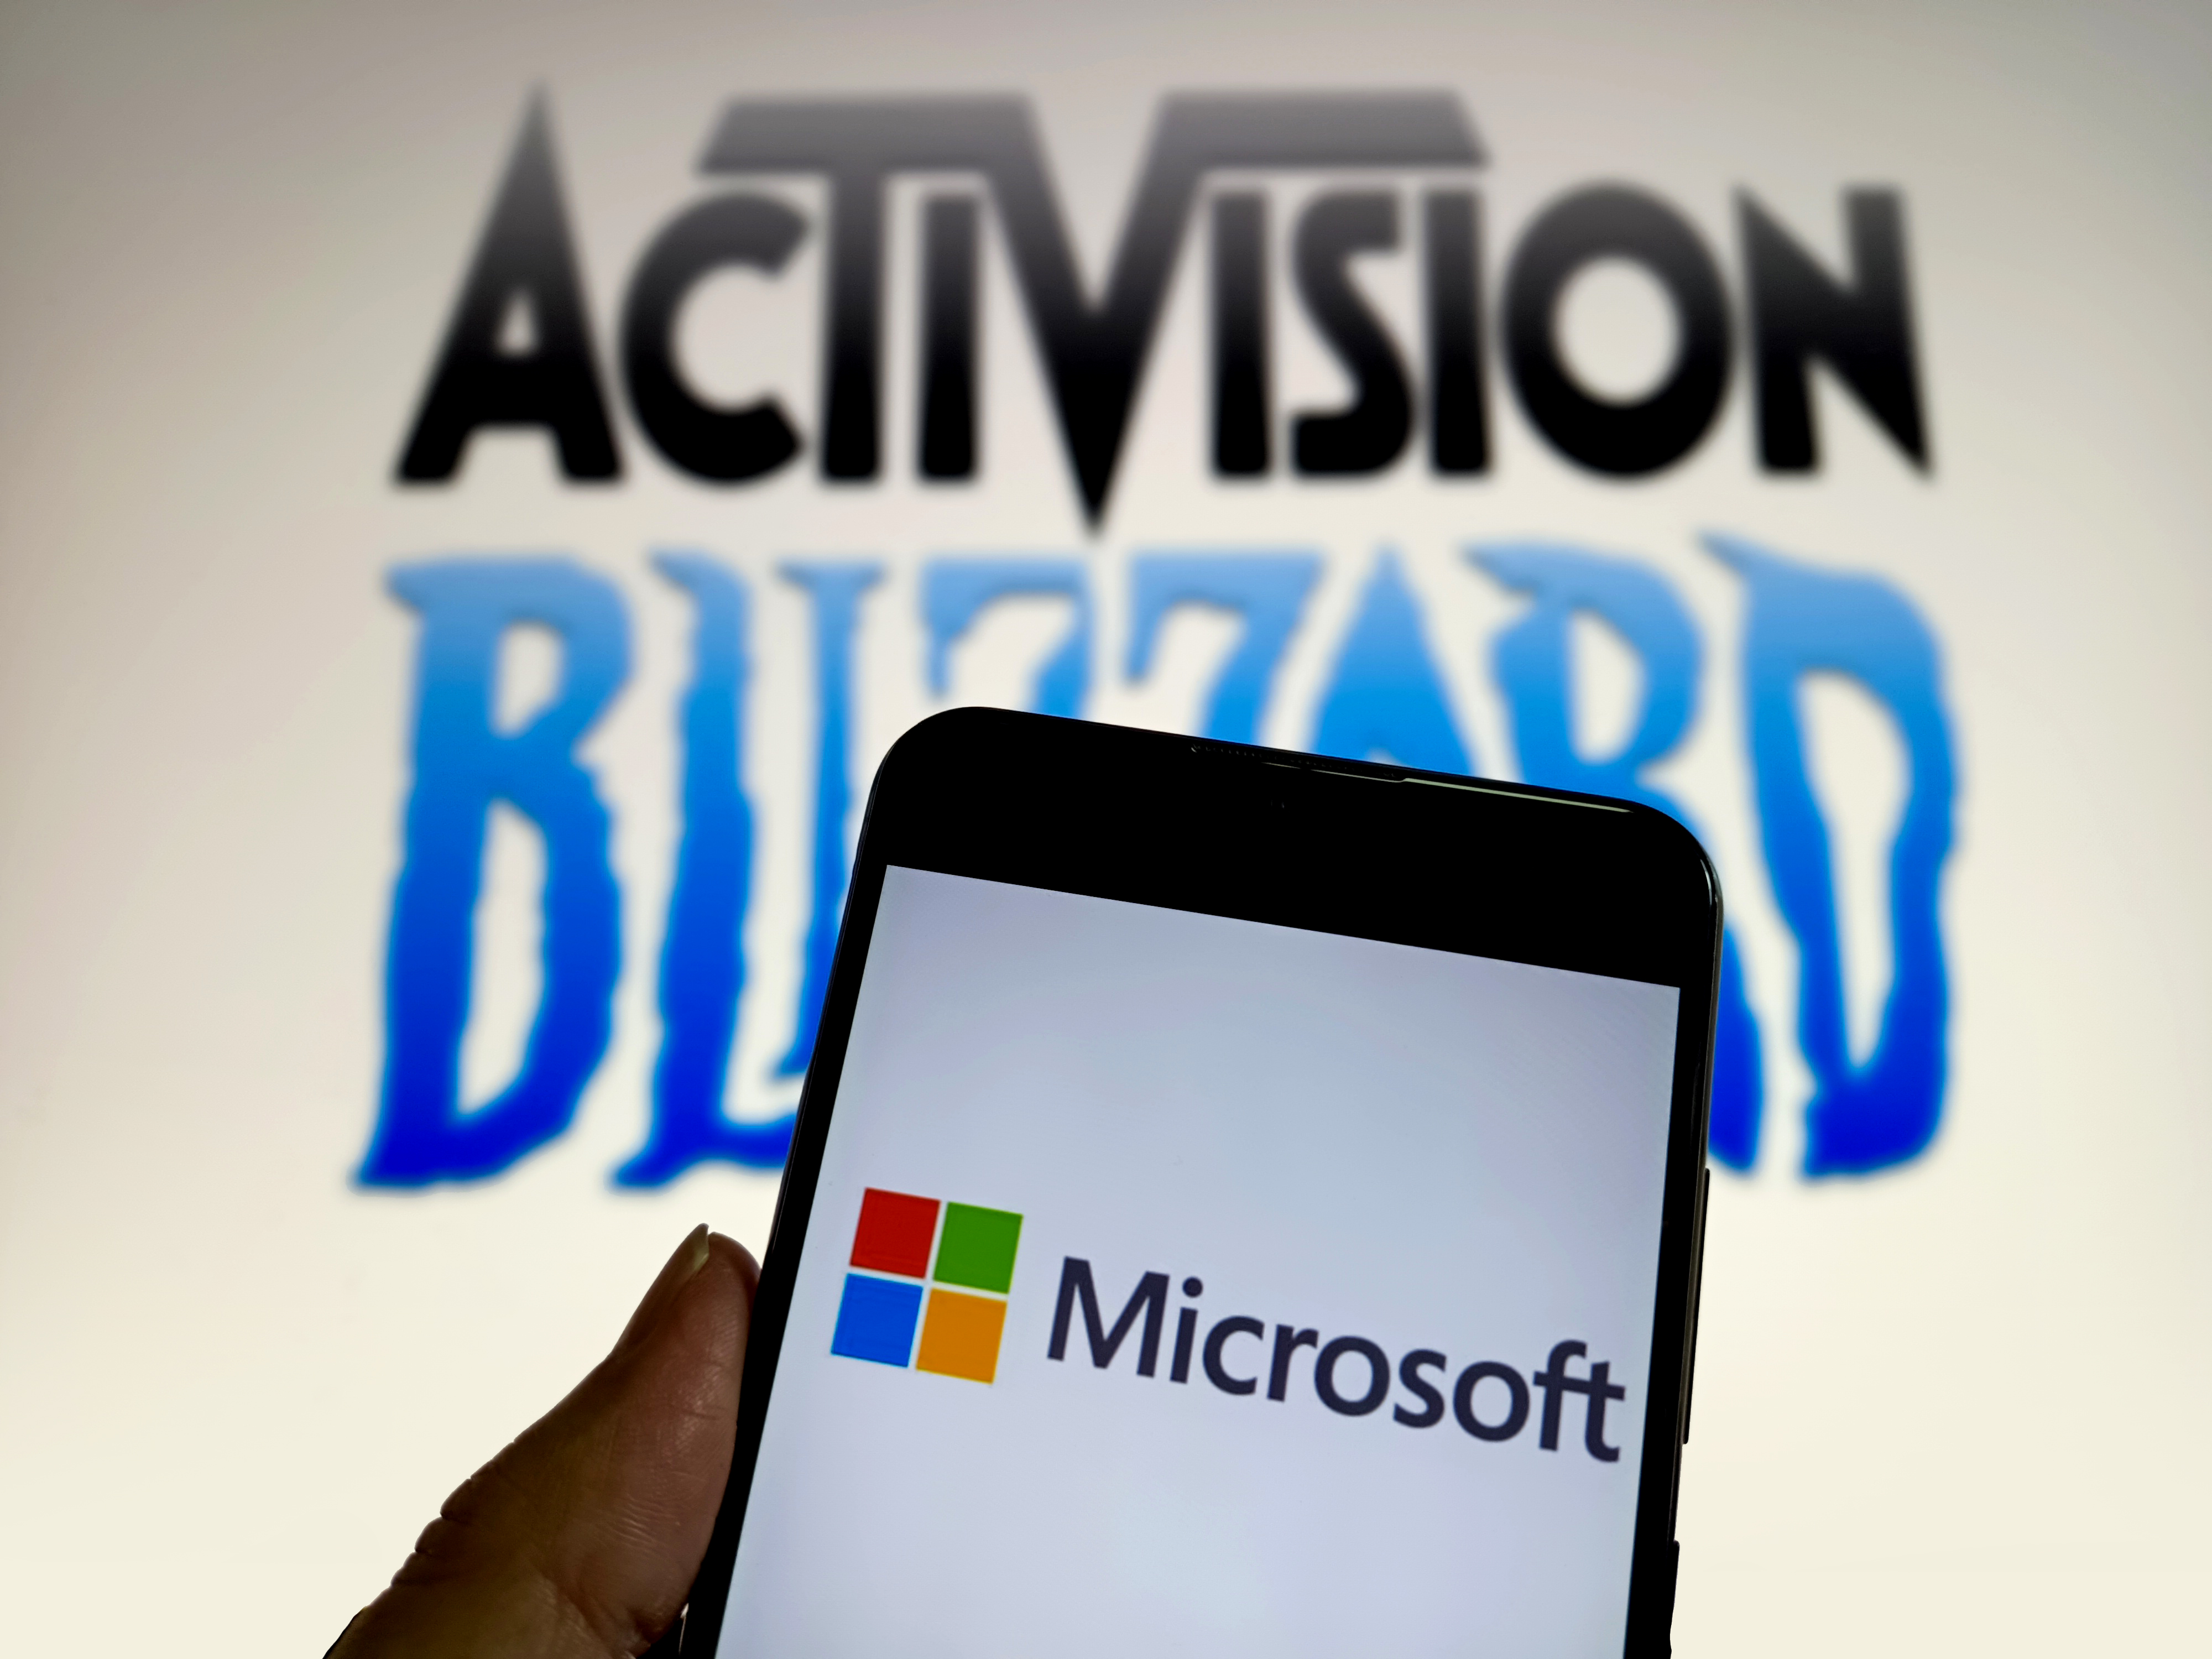 A phone with the Microsoft logo is held up in front of the Activision Blizzard logo, illustrating Microsoft’s acquisition deal.